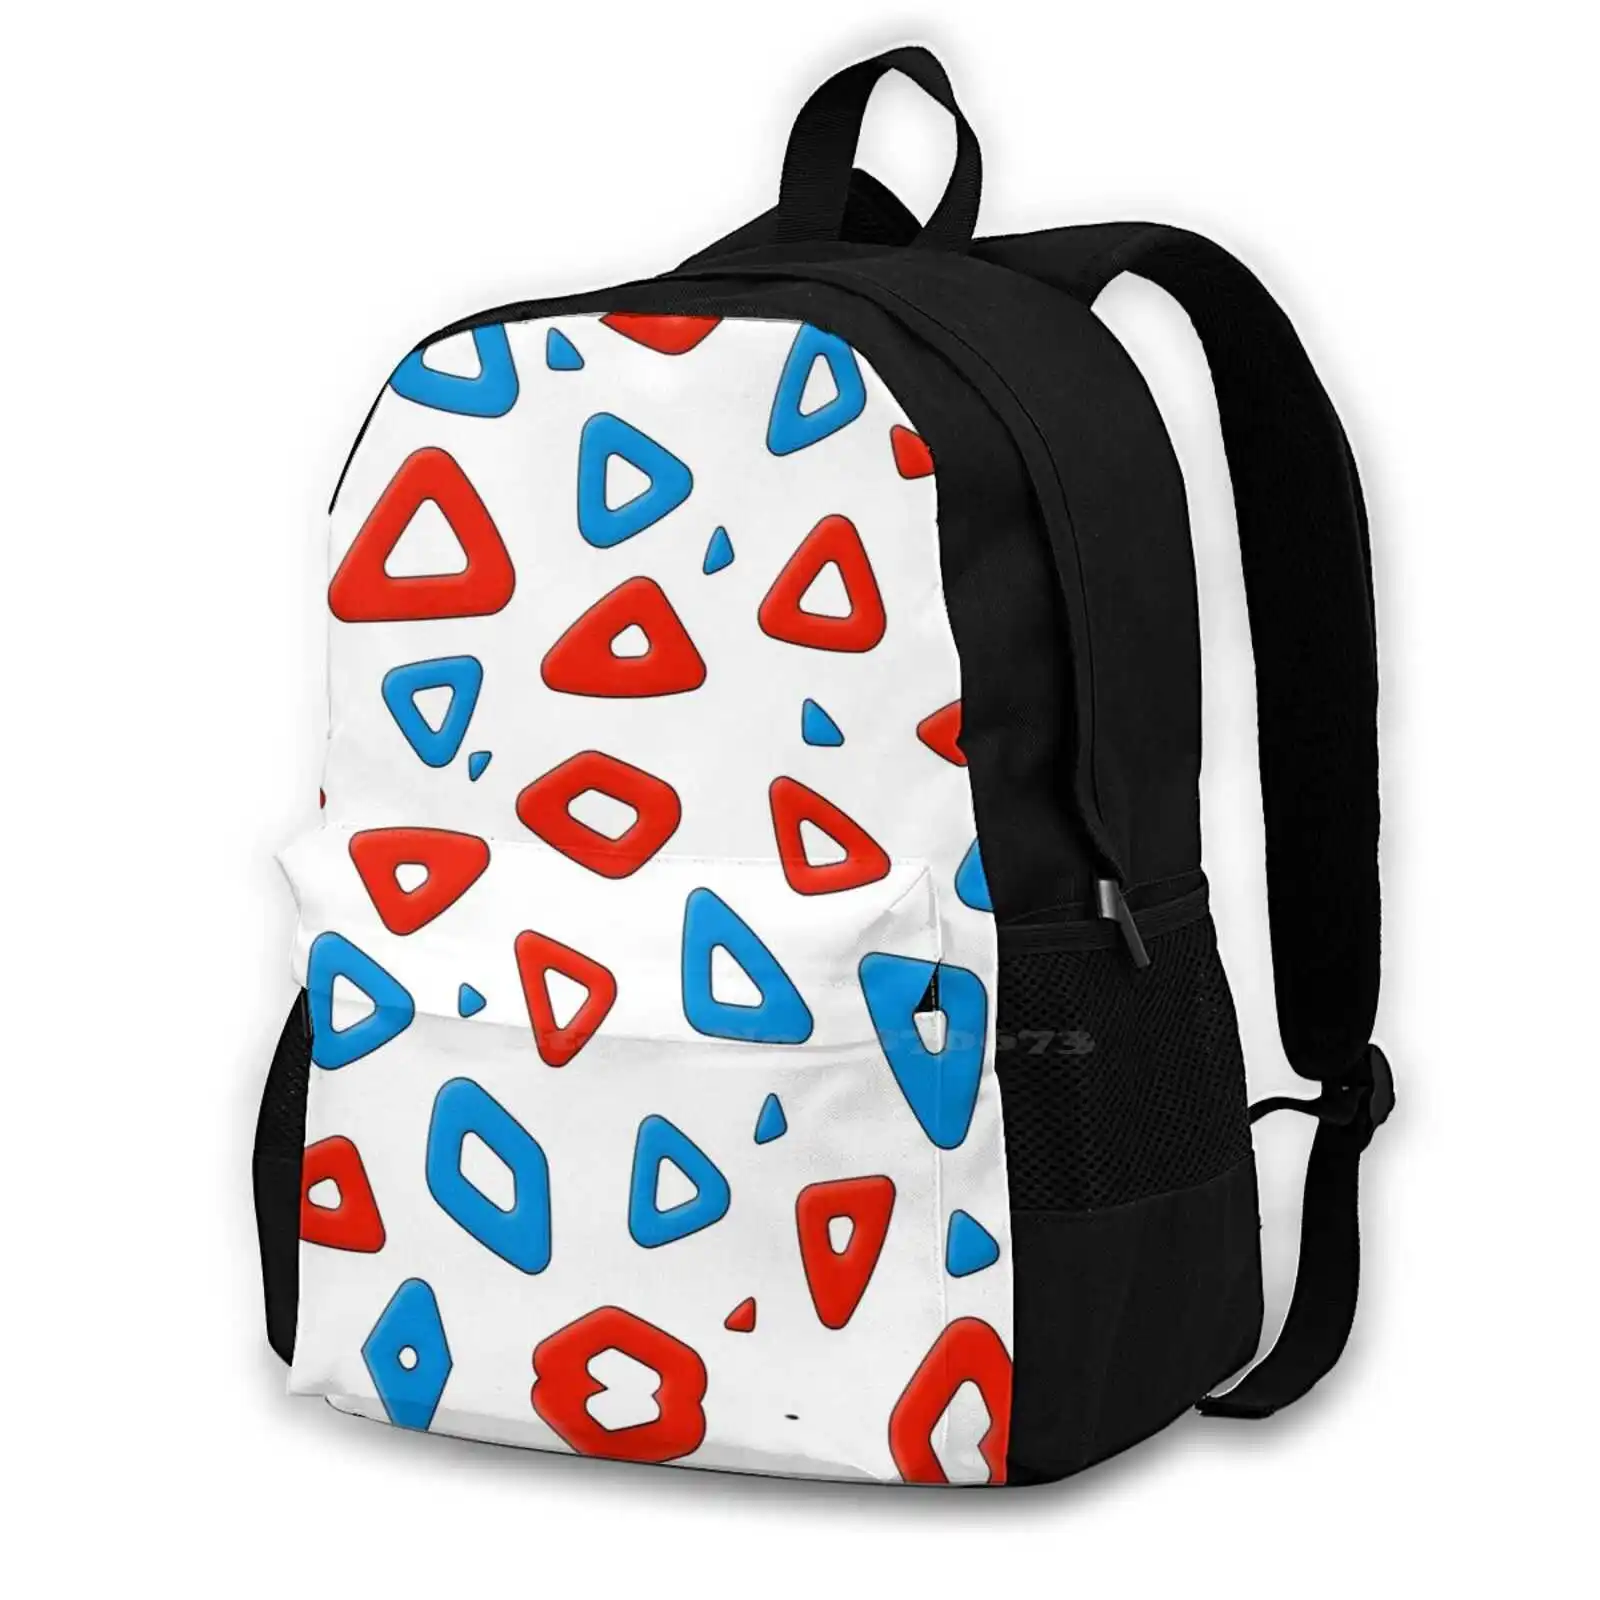 

Togepi Stains 1 School Bags Travel Laptop Backpack Togepi Stain Spots Circles Togekiss Egg Ovals Rainbow Color Multicolored